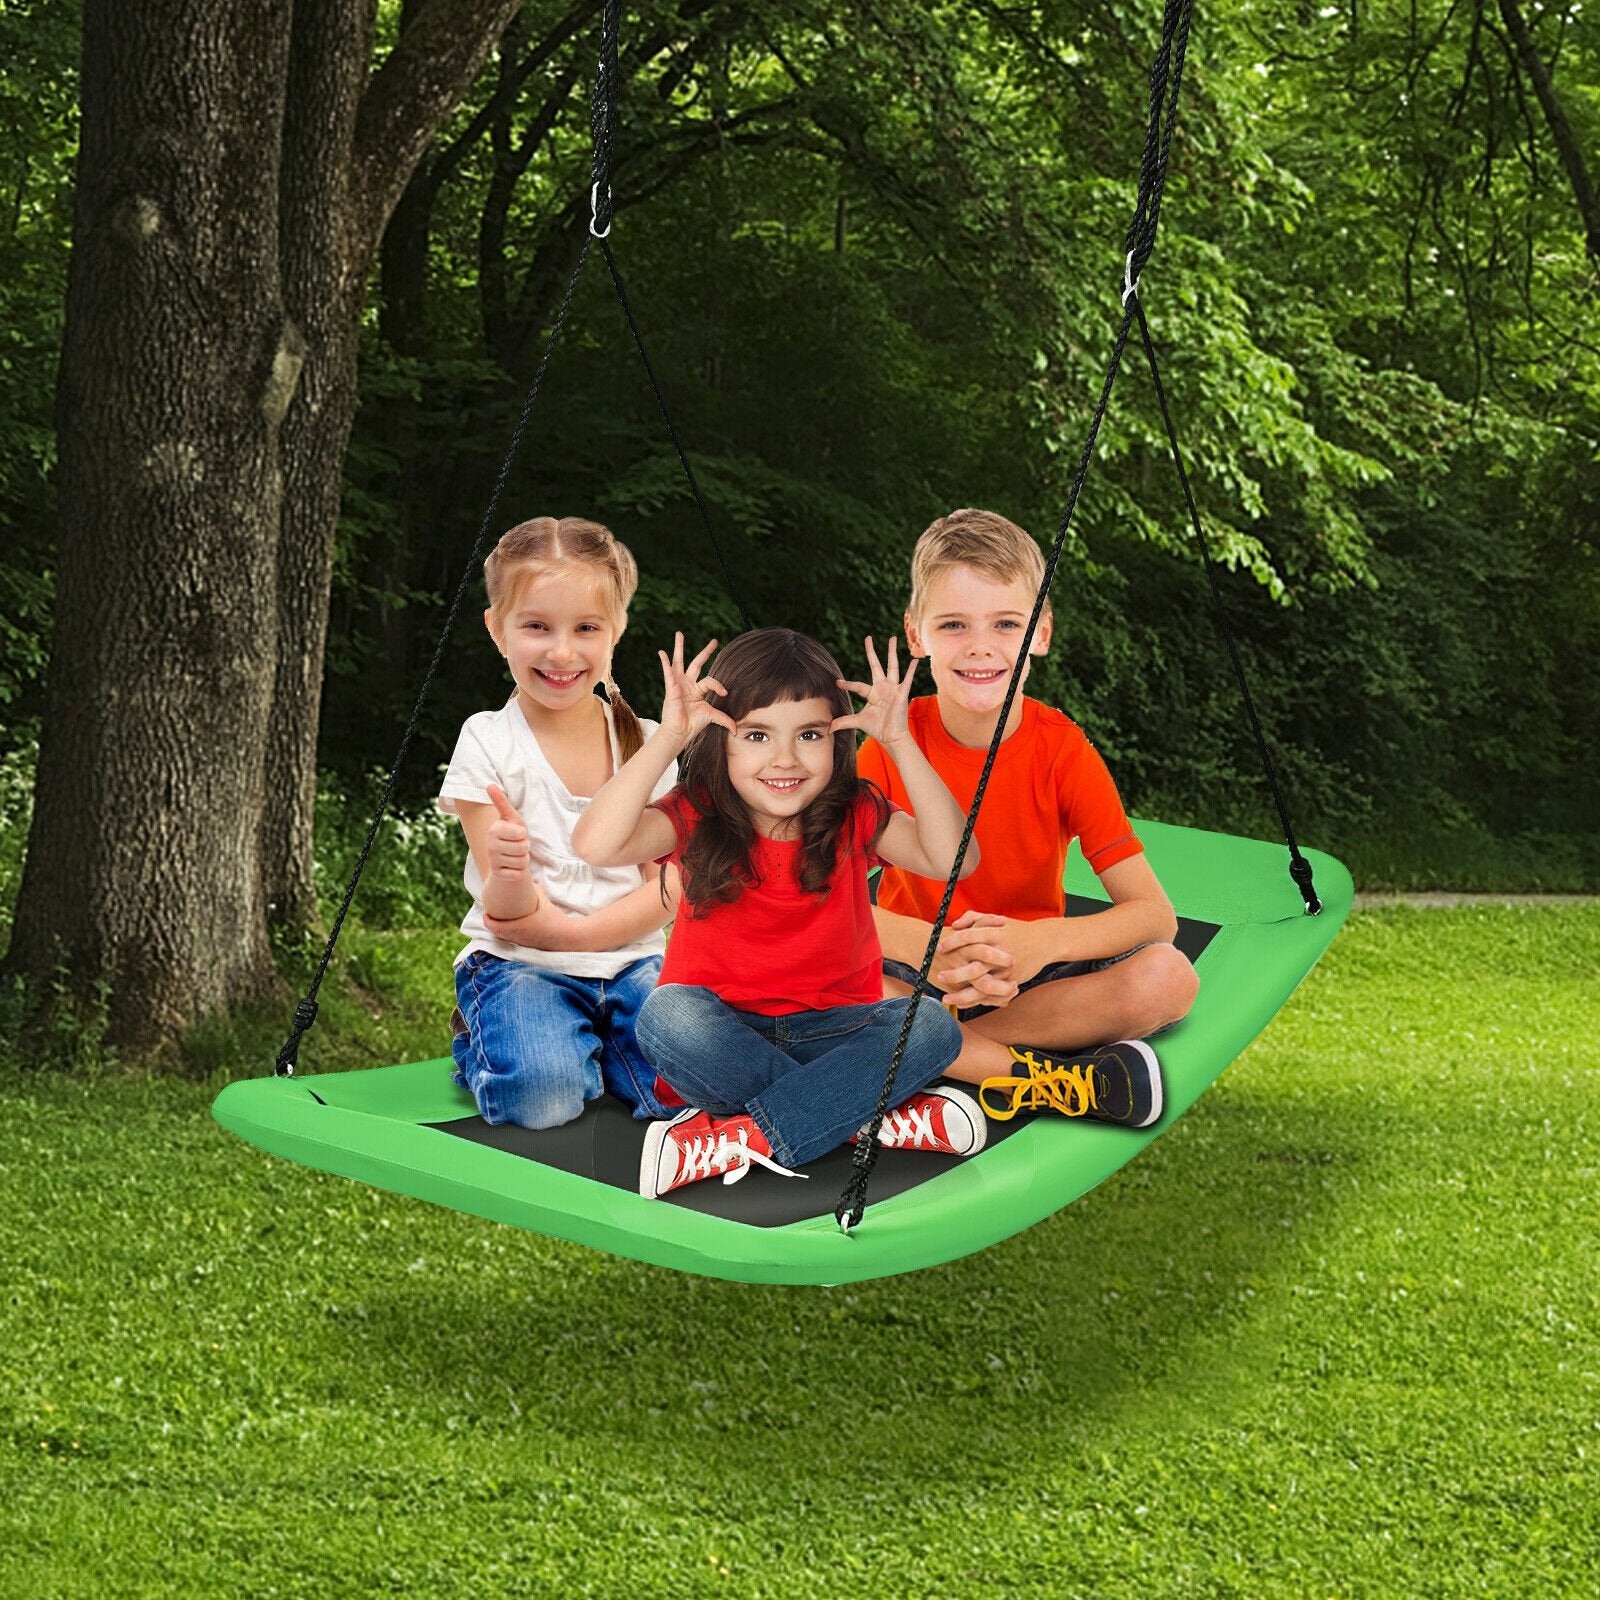 700lb Giant 60 Inch Platform Tree Swing for Kids and Adults, Green - Gallery Canada